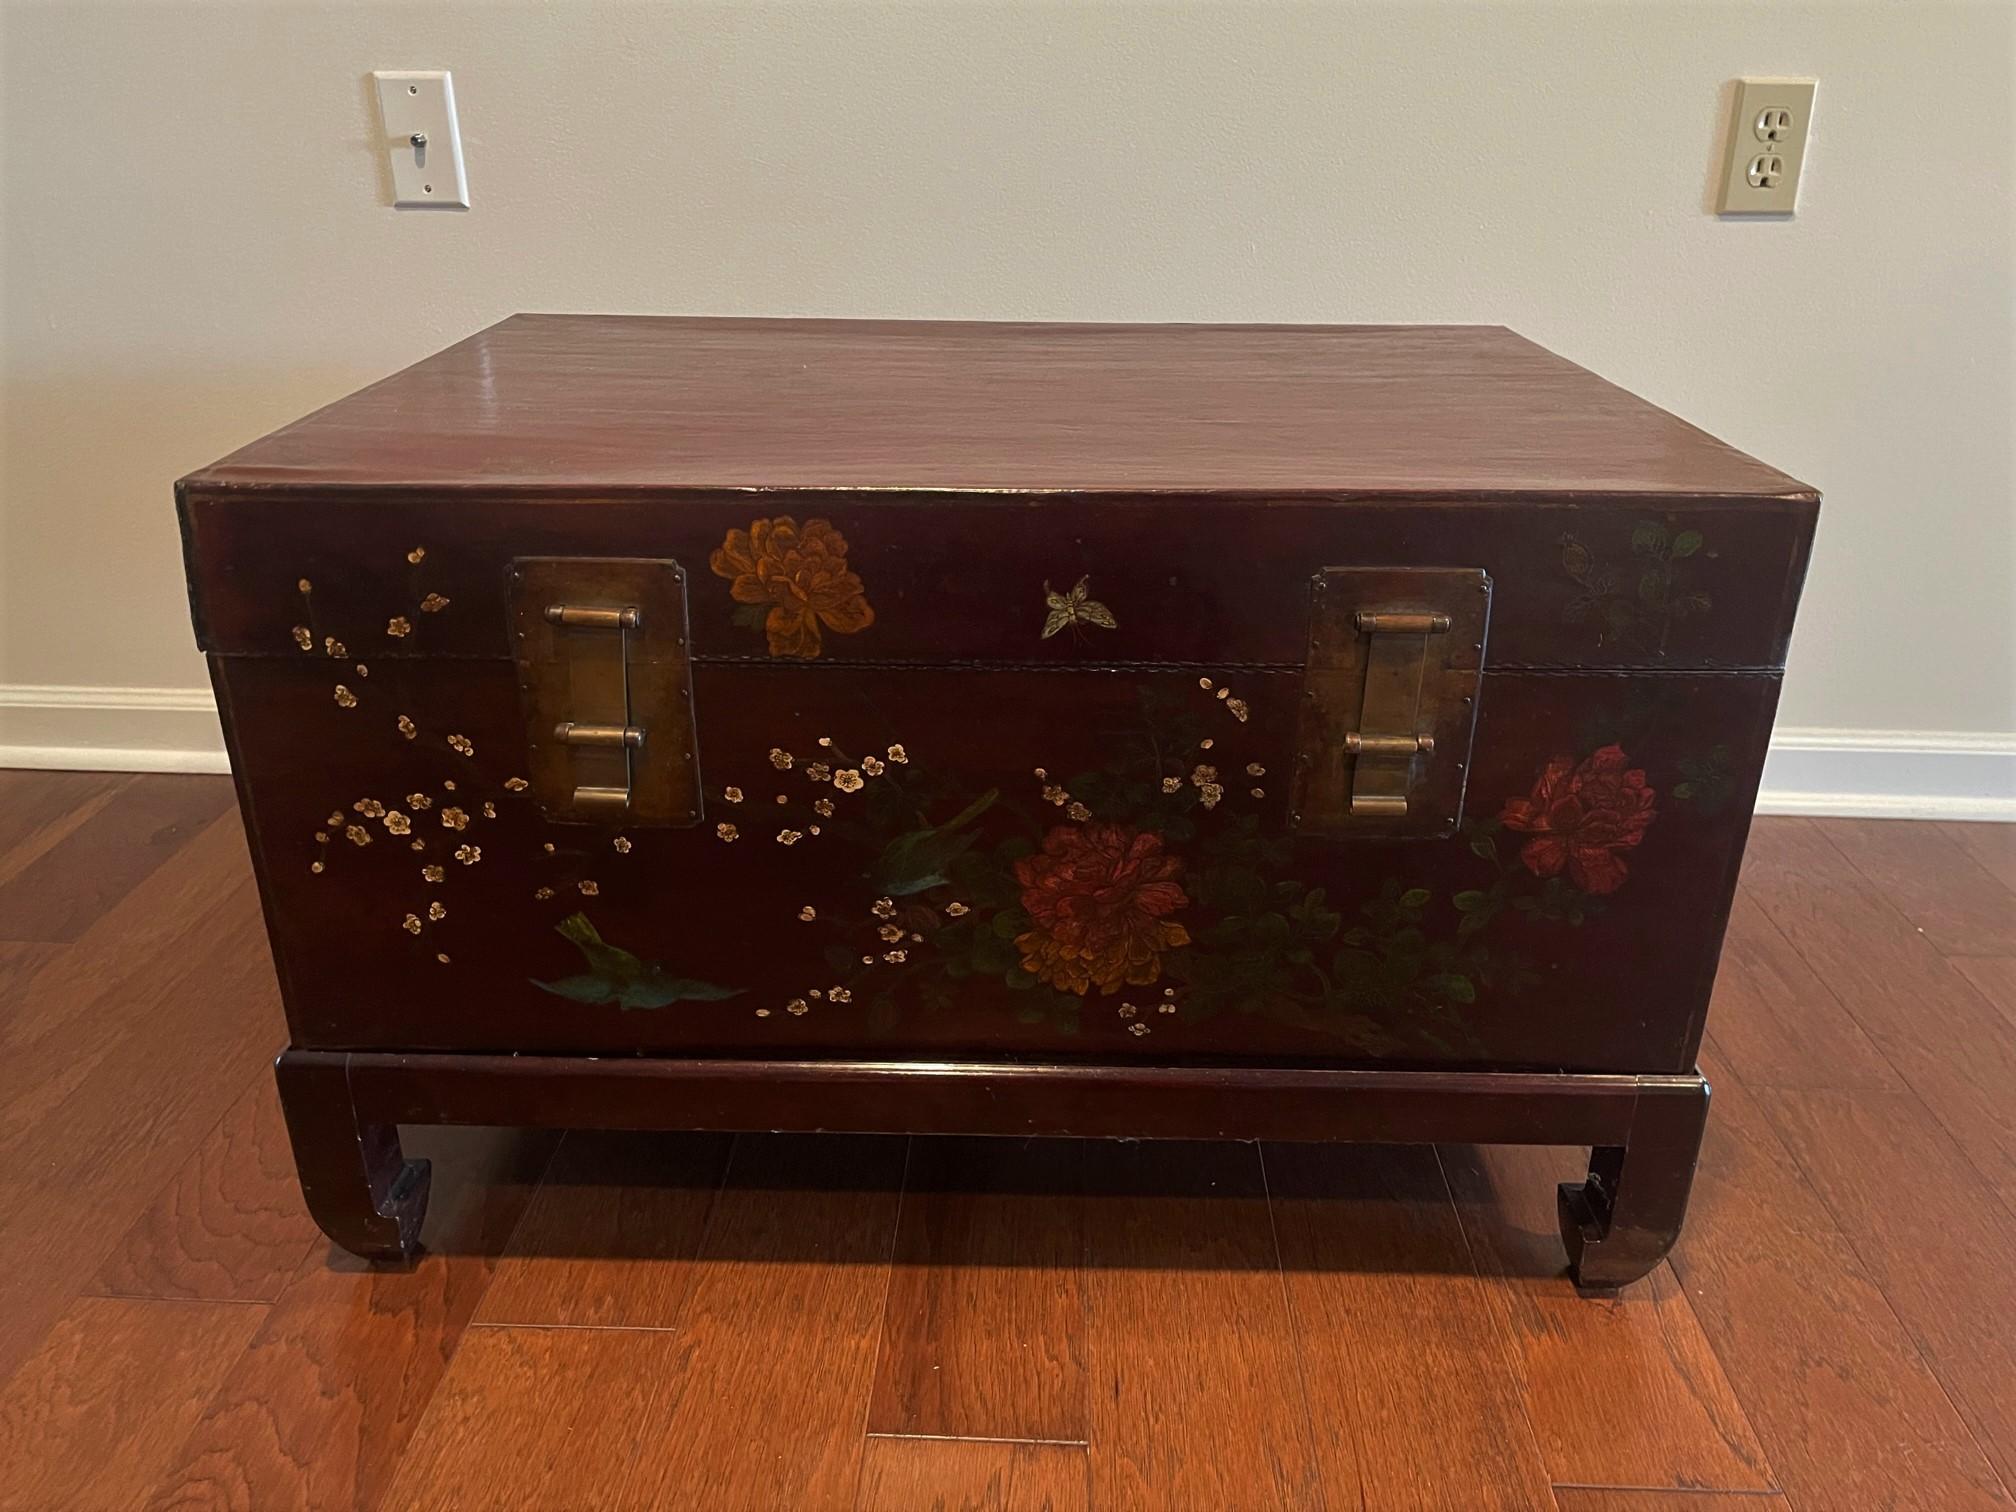 Chinese leather trunk, 18th Century. Colored floral motif painted on sides/top; lined with writing on paper. Measures: 32.25